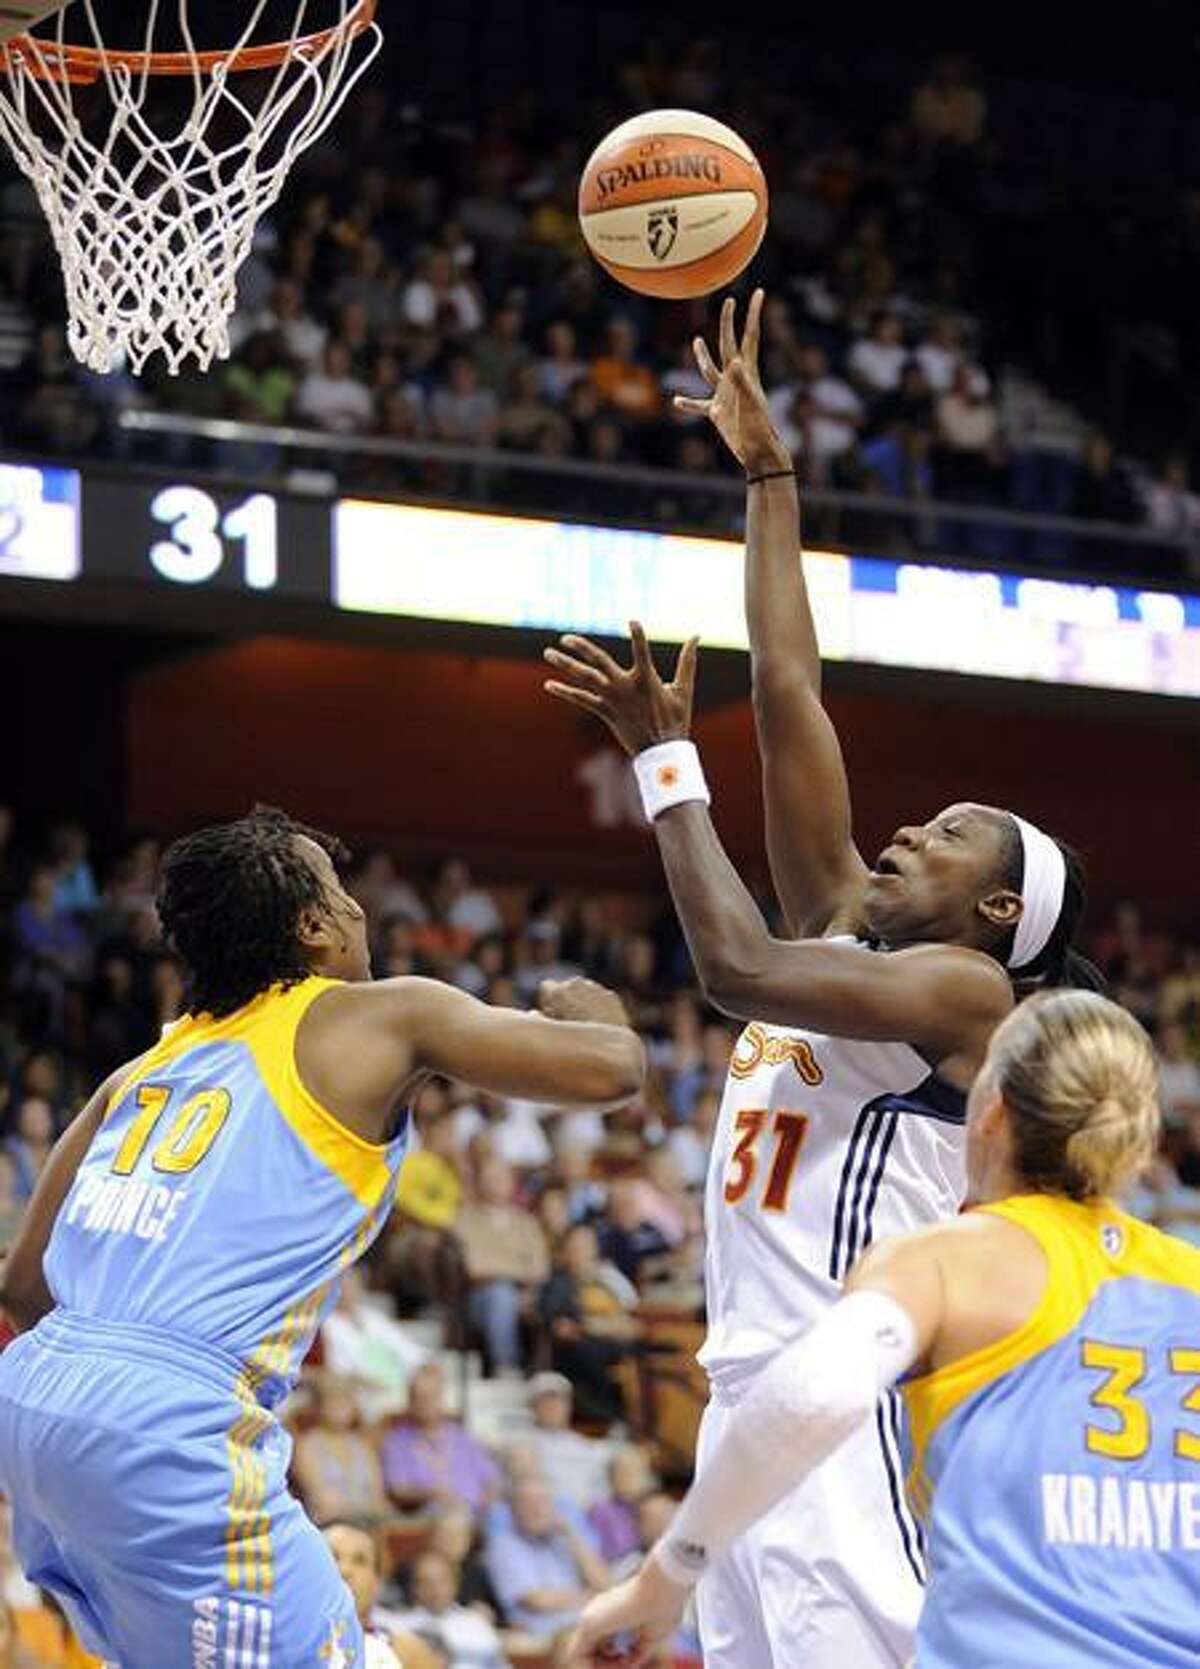 Connecticut Sun's Tina Charles shoots over Chicago Sky's Epiphanny Prince during the first half of their WNBA basketball game in Uncasville, Conn., on Sunday, June 19, 2011. (AP Photo/Fred Beckham)